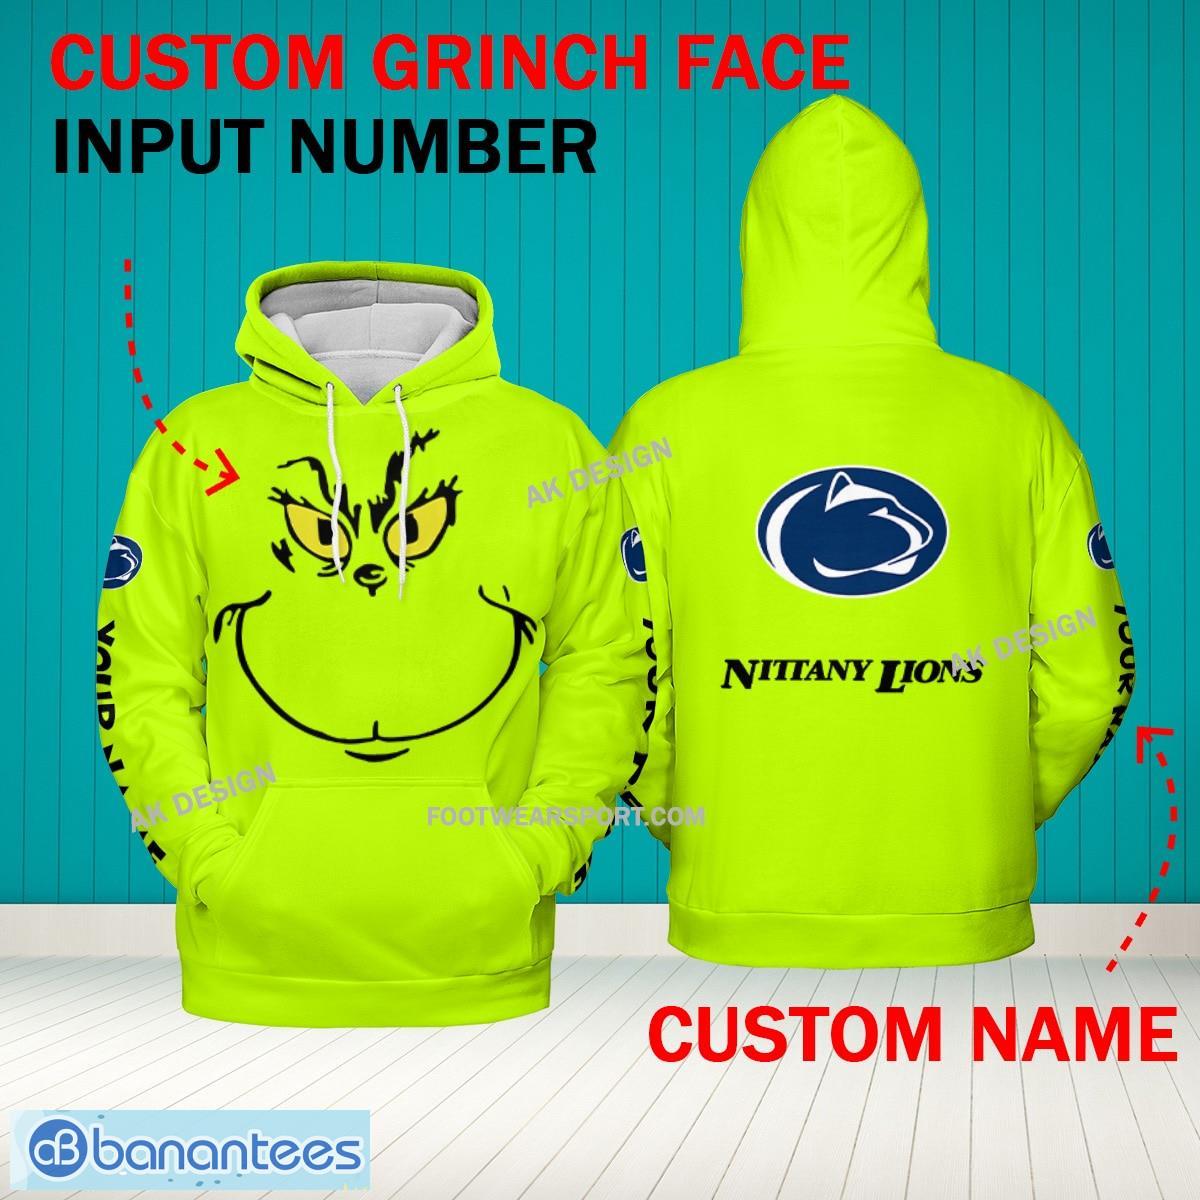 Grinch Face Penn State Nittany Lions 3D Hoodie, Zip Hoodie, Sweater Green AOP Custom Number And Name - Grinch Face NCAA Penn State Nittany Lions 3D Hoodie